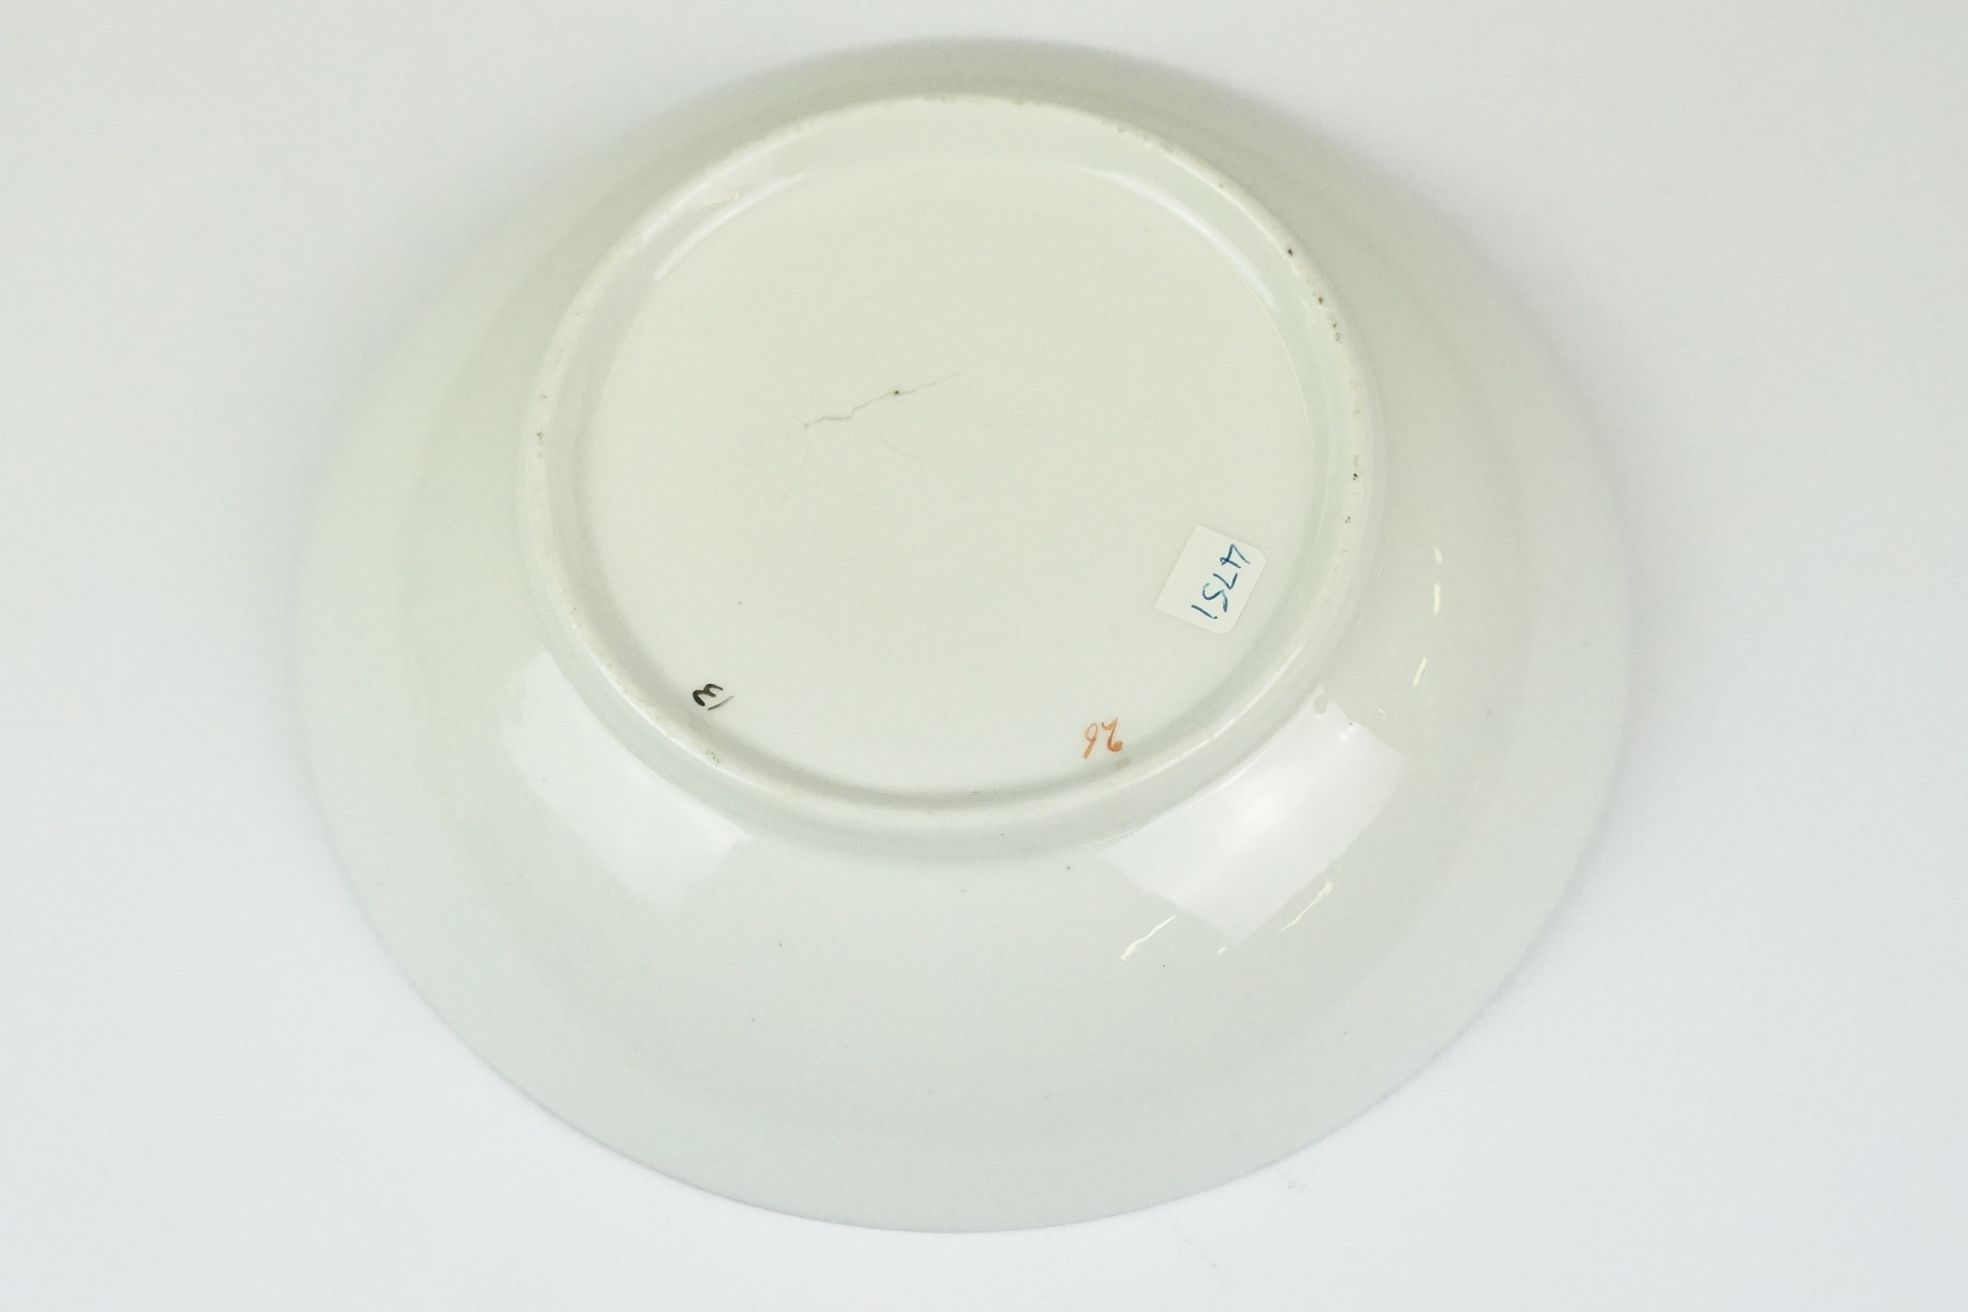 Swansea pottery cup and saucer, hand painted with a floral garland, the saucer, 13.5cm diameter - Image 7 of 7